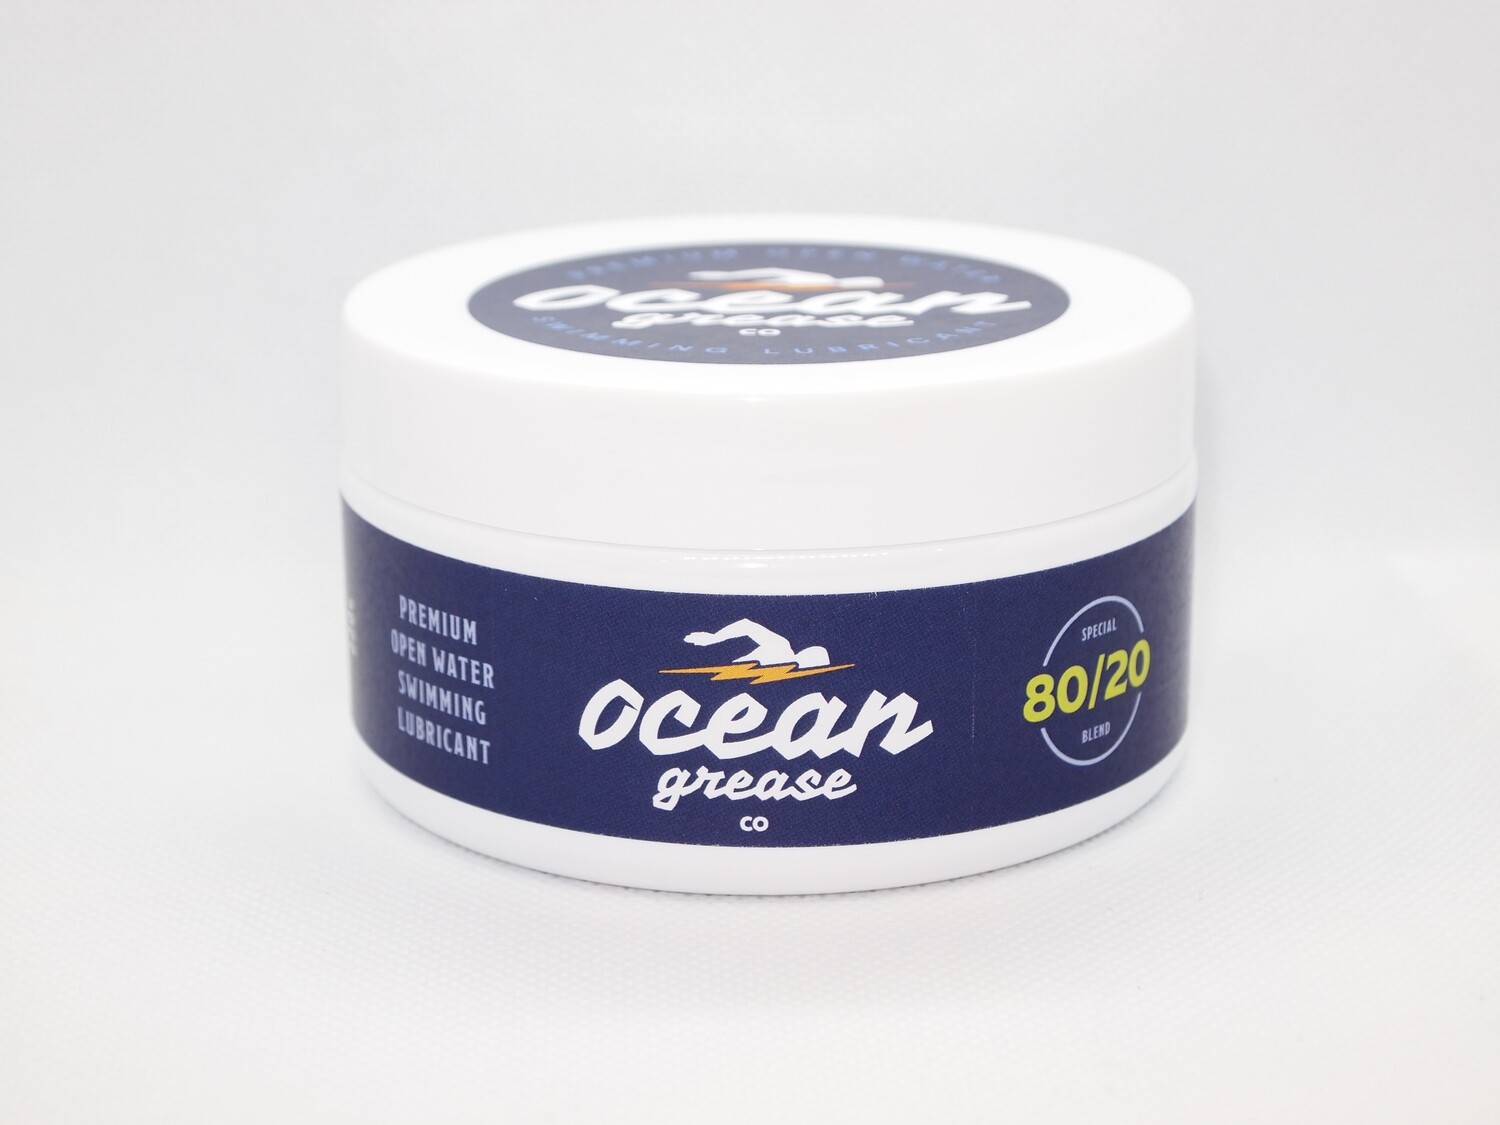 Ocean Grease 80/20 220g (Unscented)